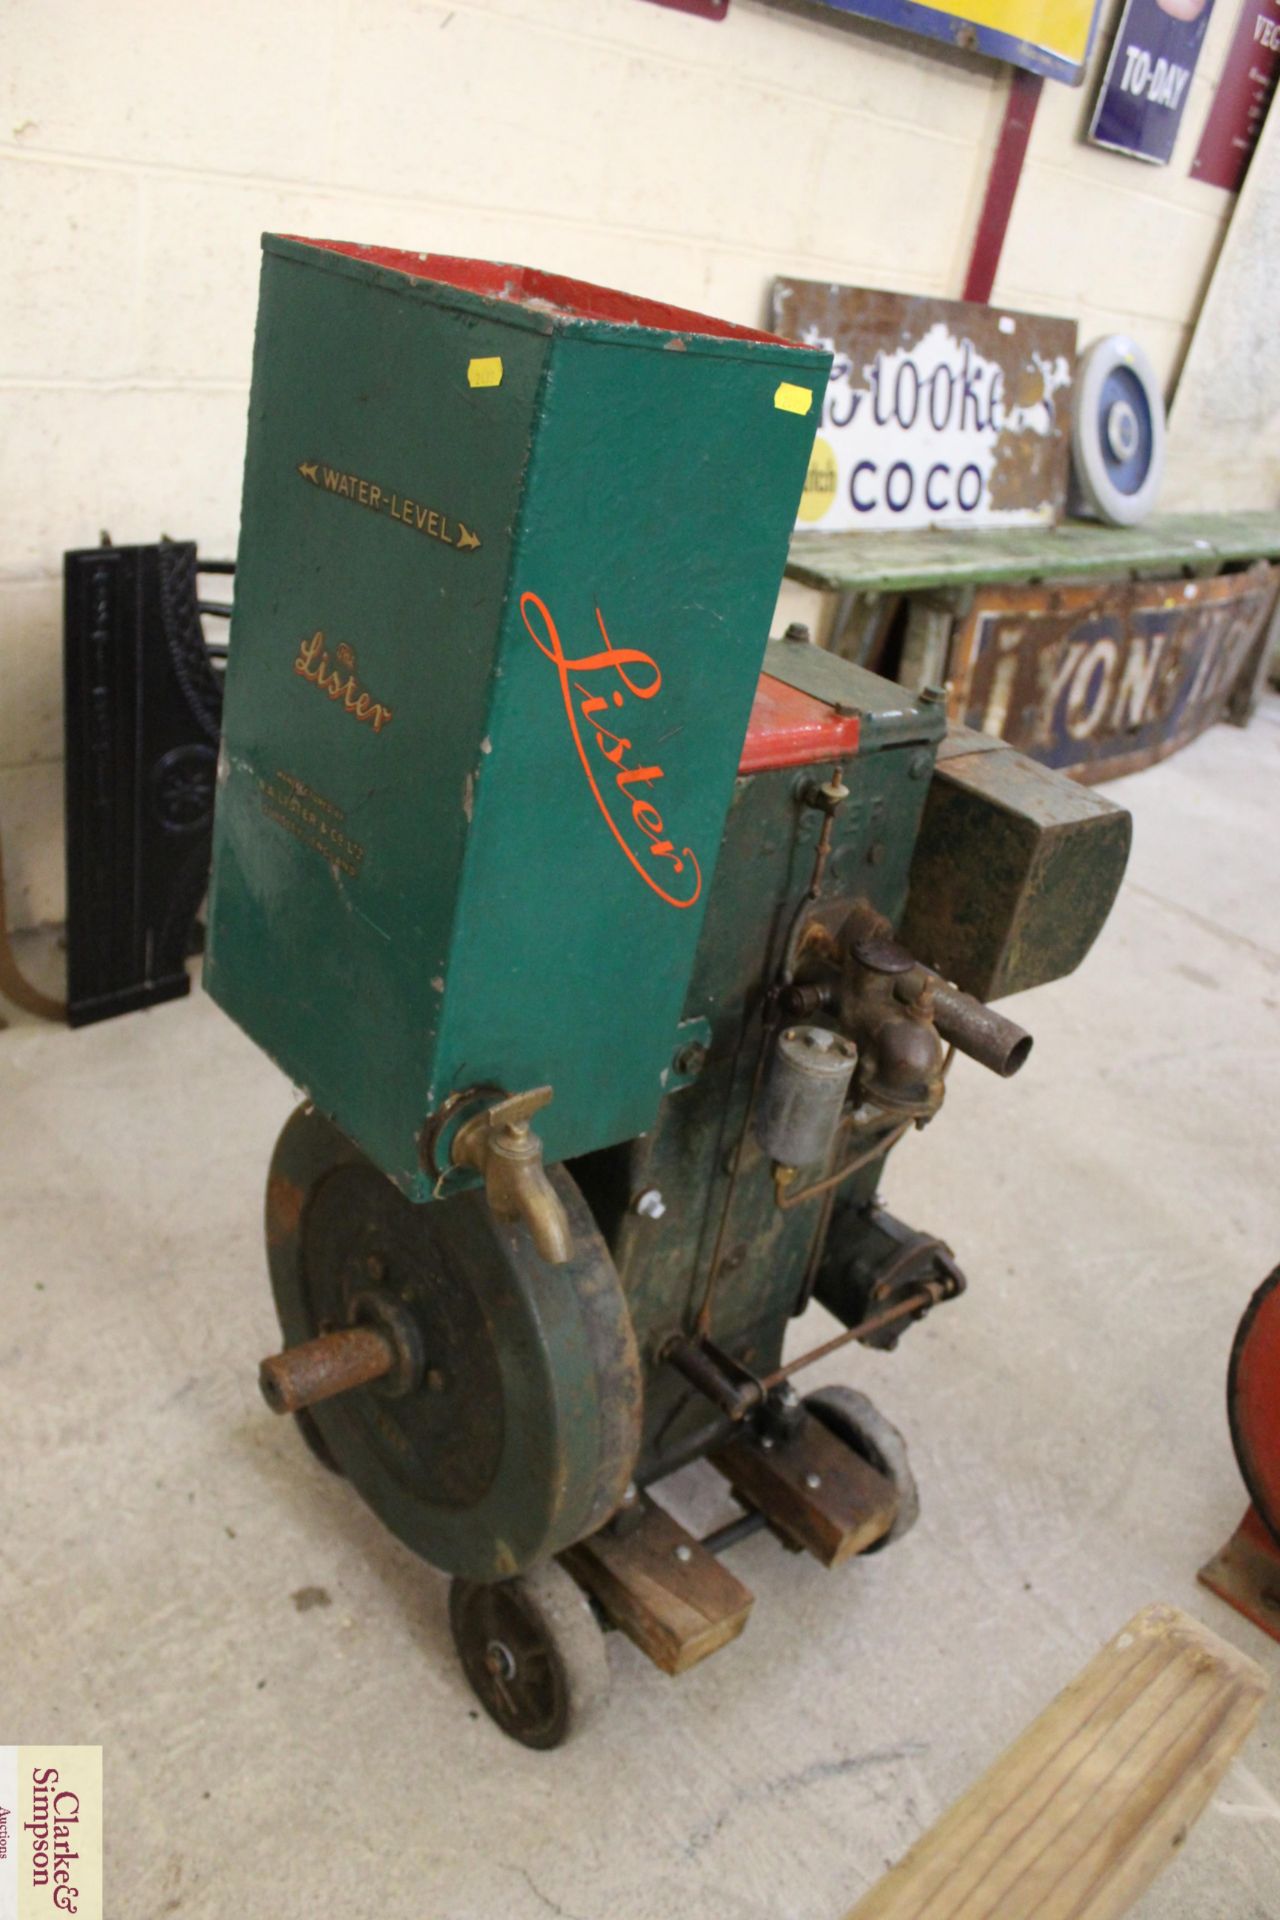 A Lister D stationary engine on trolley base - ven